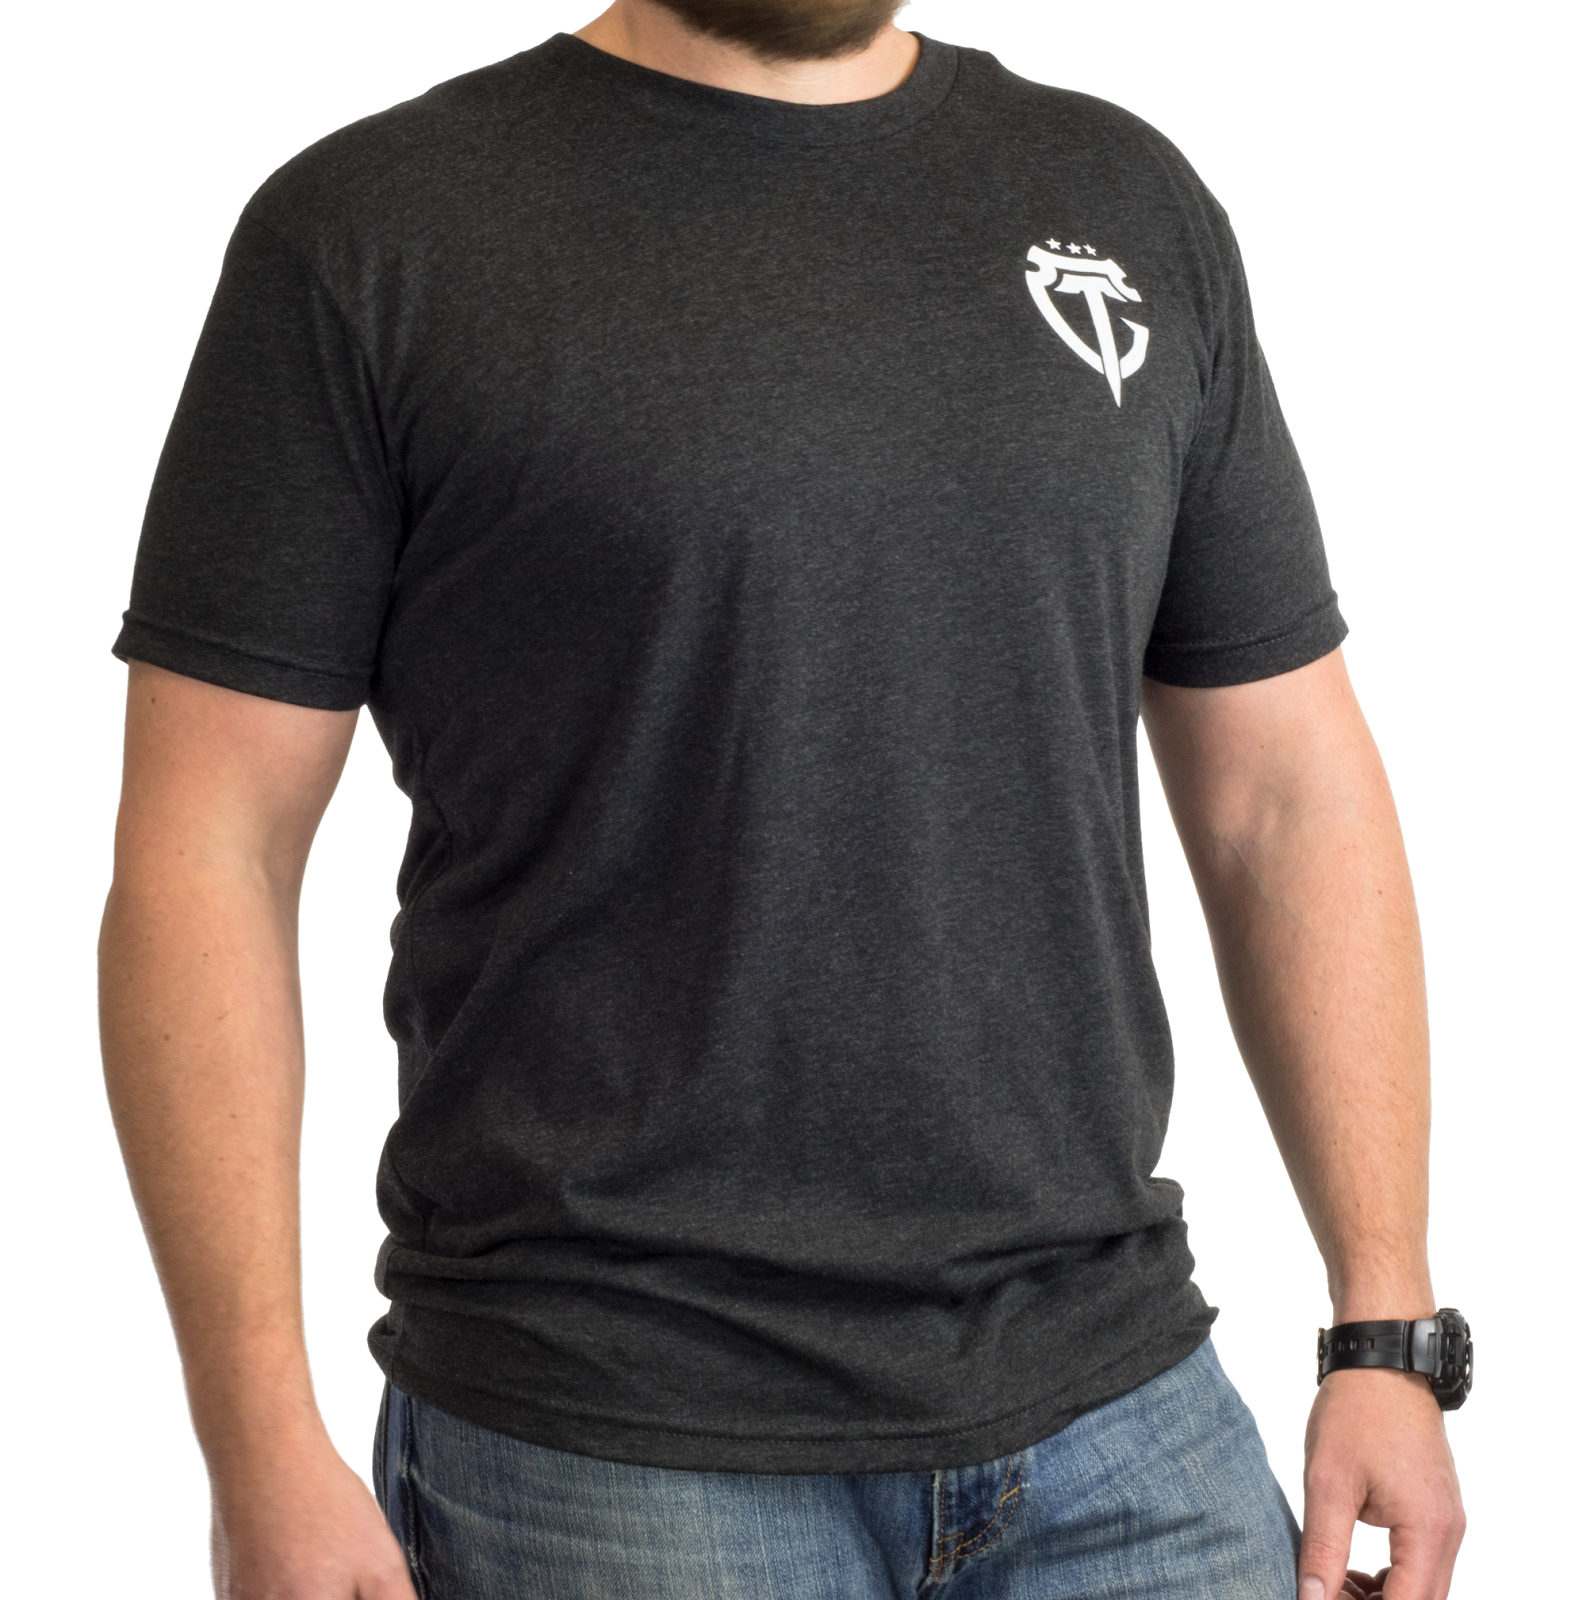 Gideon Tactical: Show Off Your GideonTactical Pride in Comfort and ...